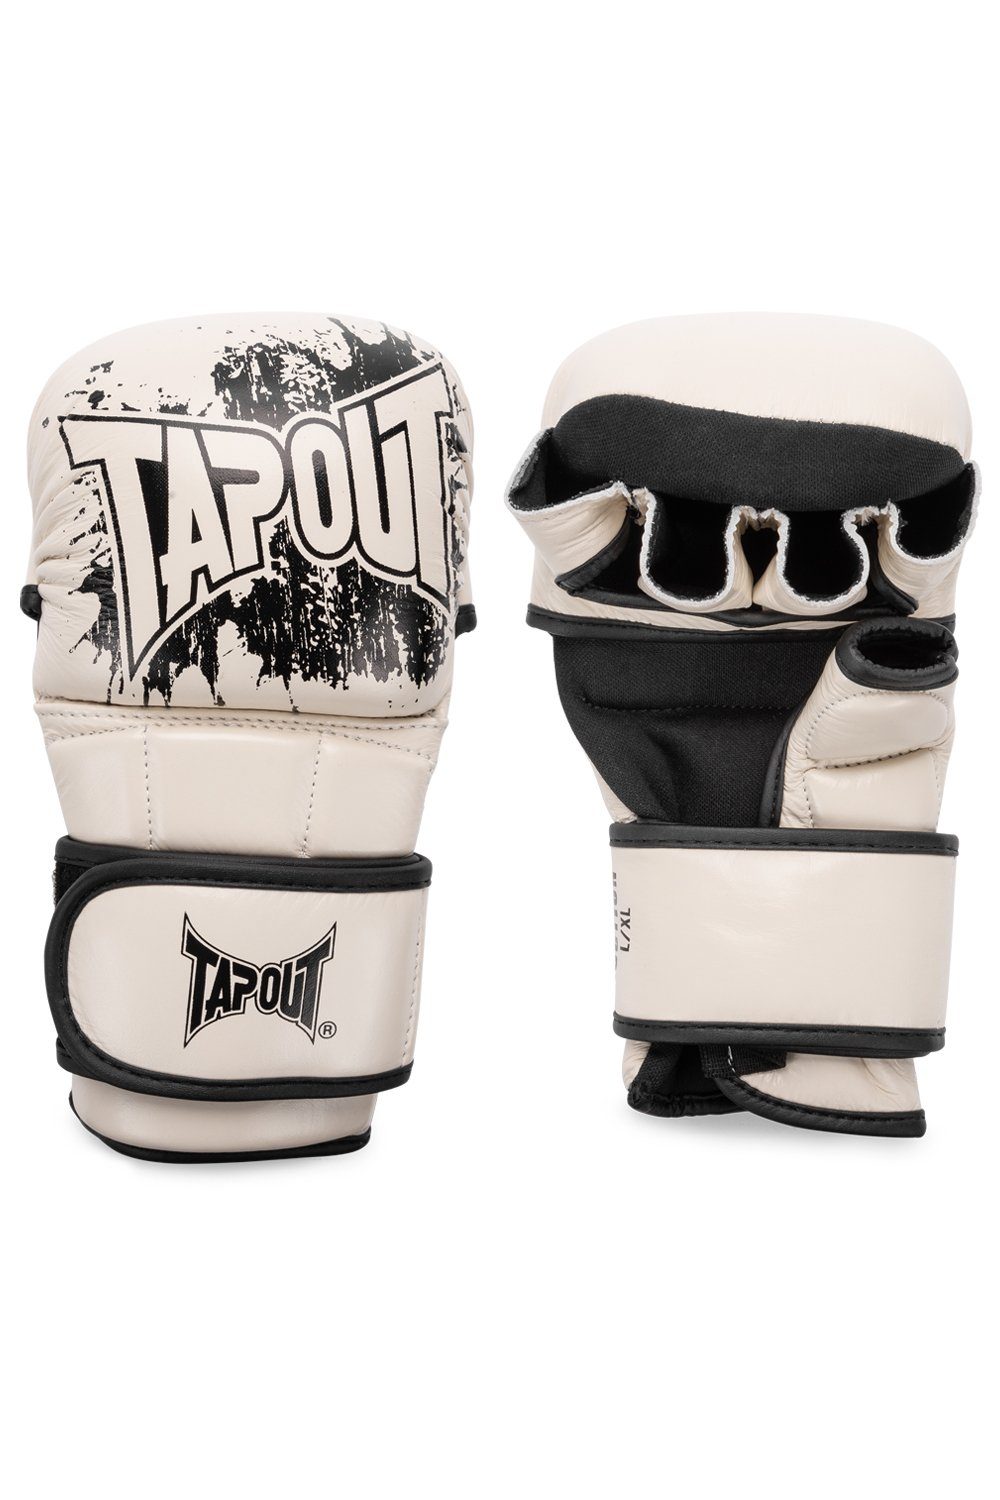 Boxhandschuhe RUCTION TAPOUT